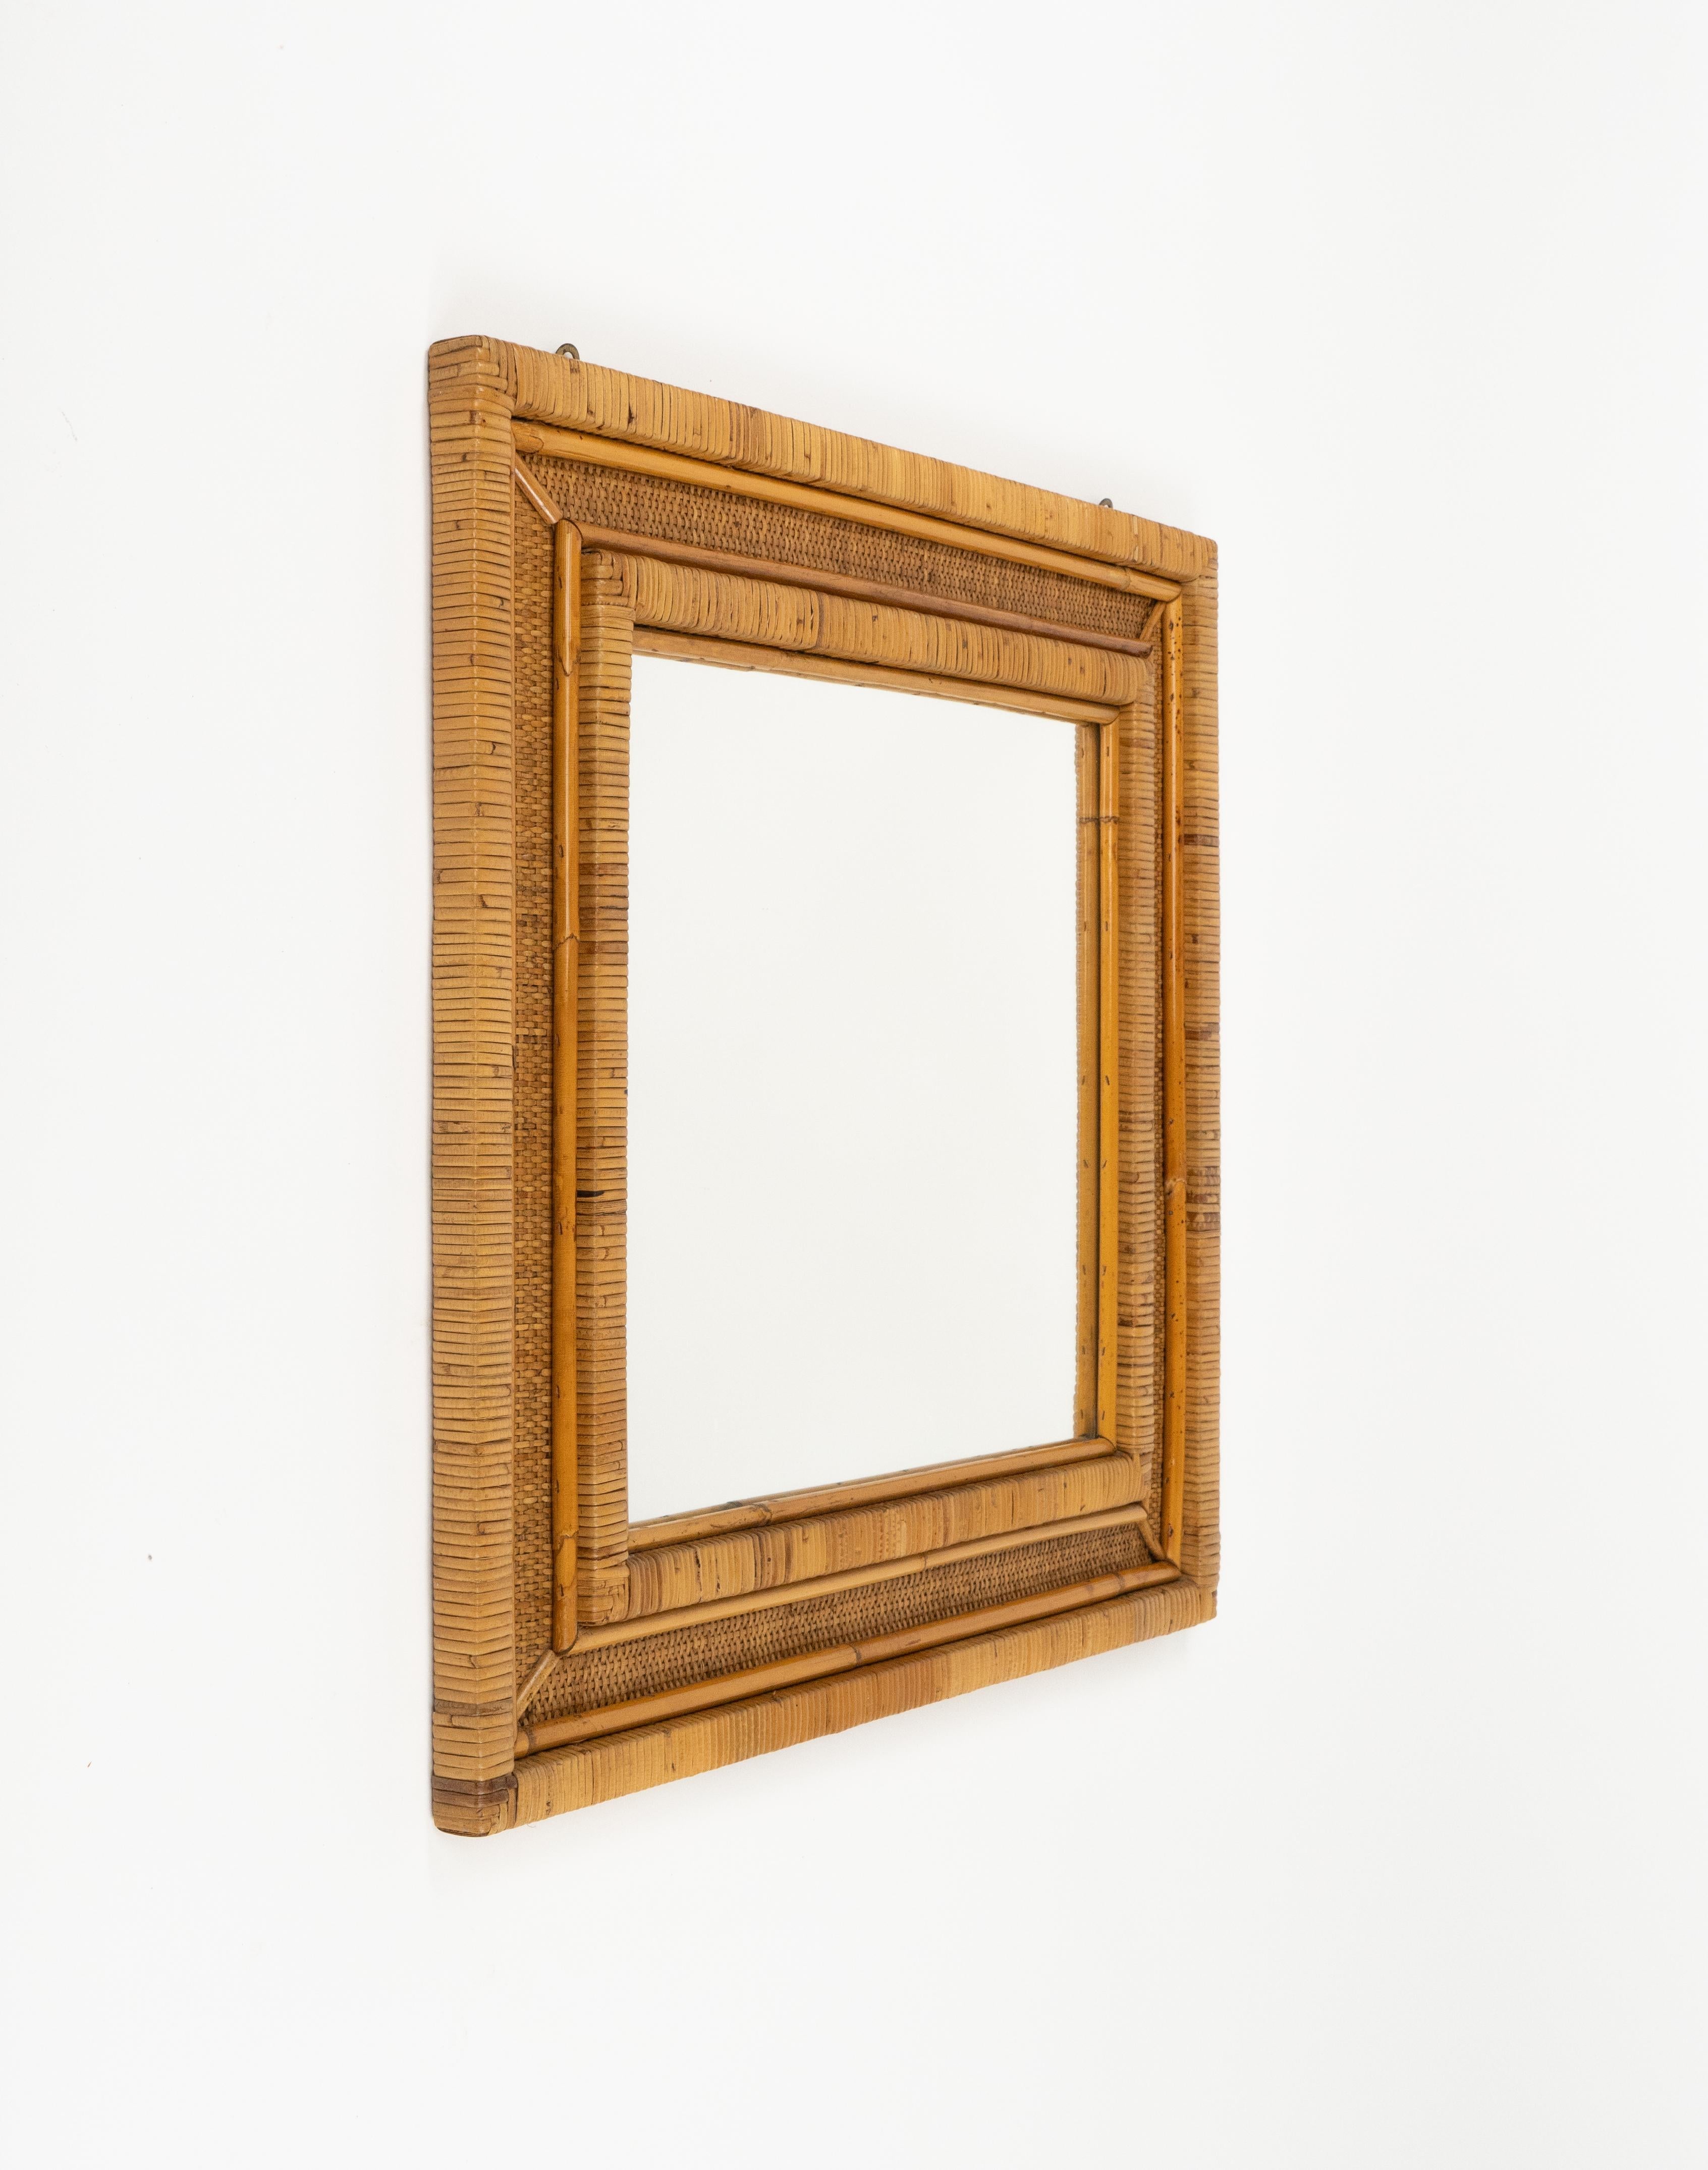 Midcentury beautiful wall mirror in rattan hand-woven wicker.

Made in Italy in the 1970s.